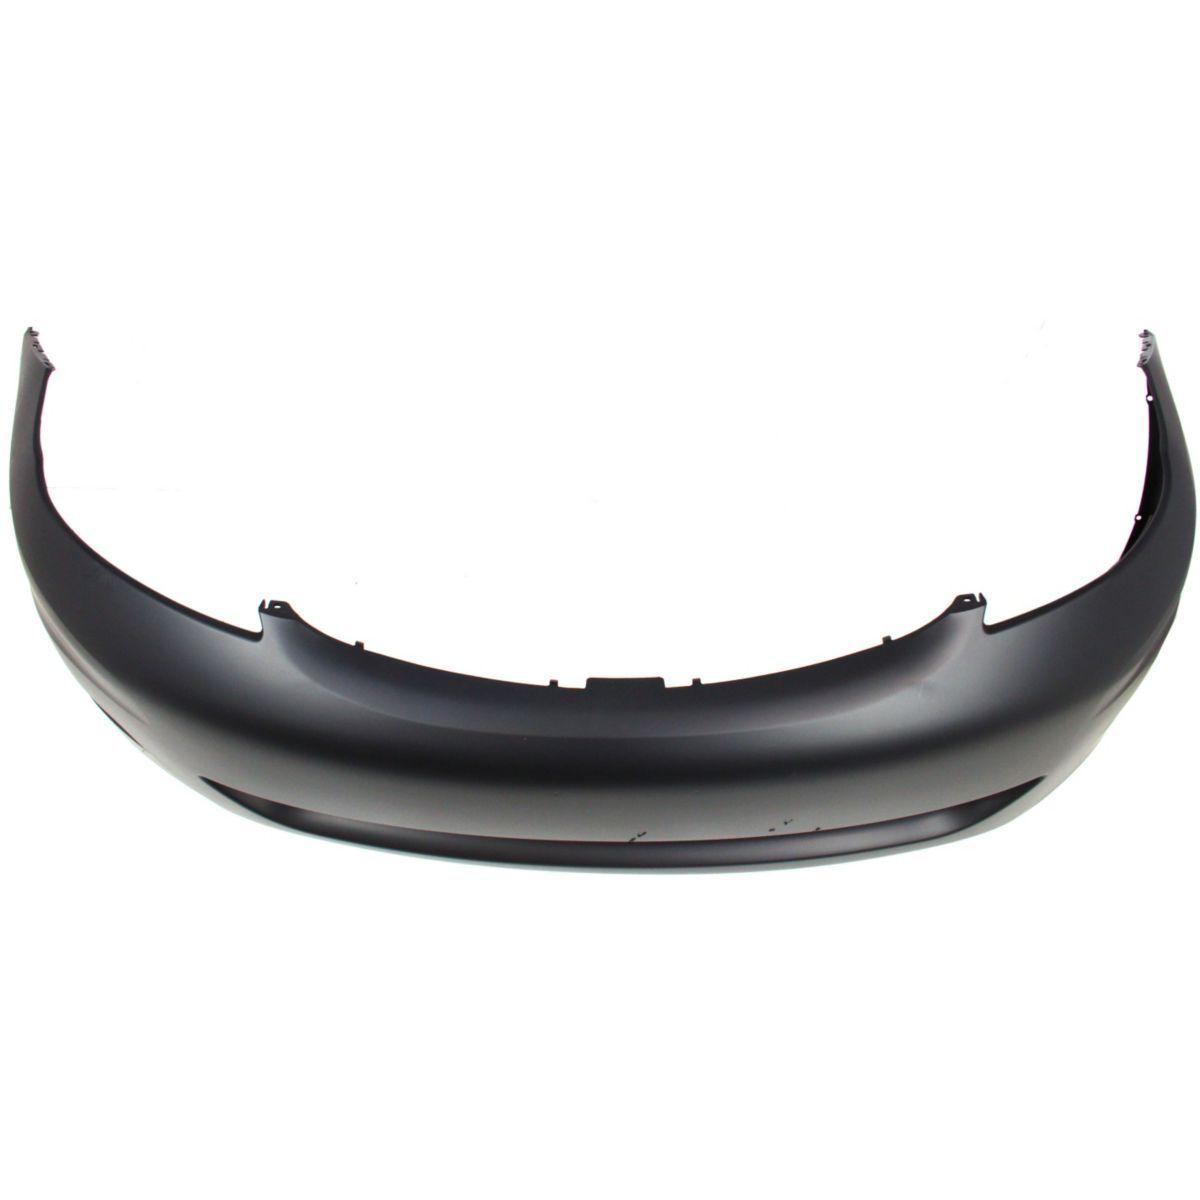 2006-2010 TOYOTA SIENNA Front Bumper Cover w/o Park Assist Sensors Painted to Match